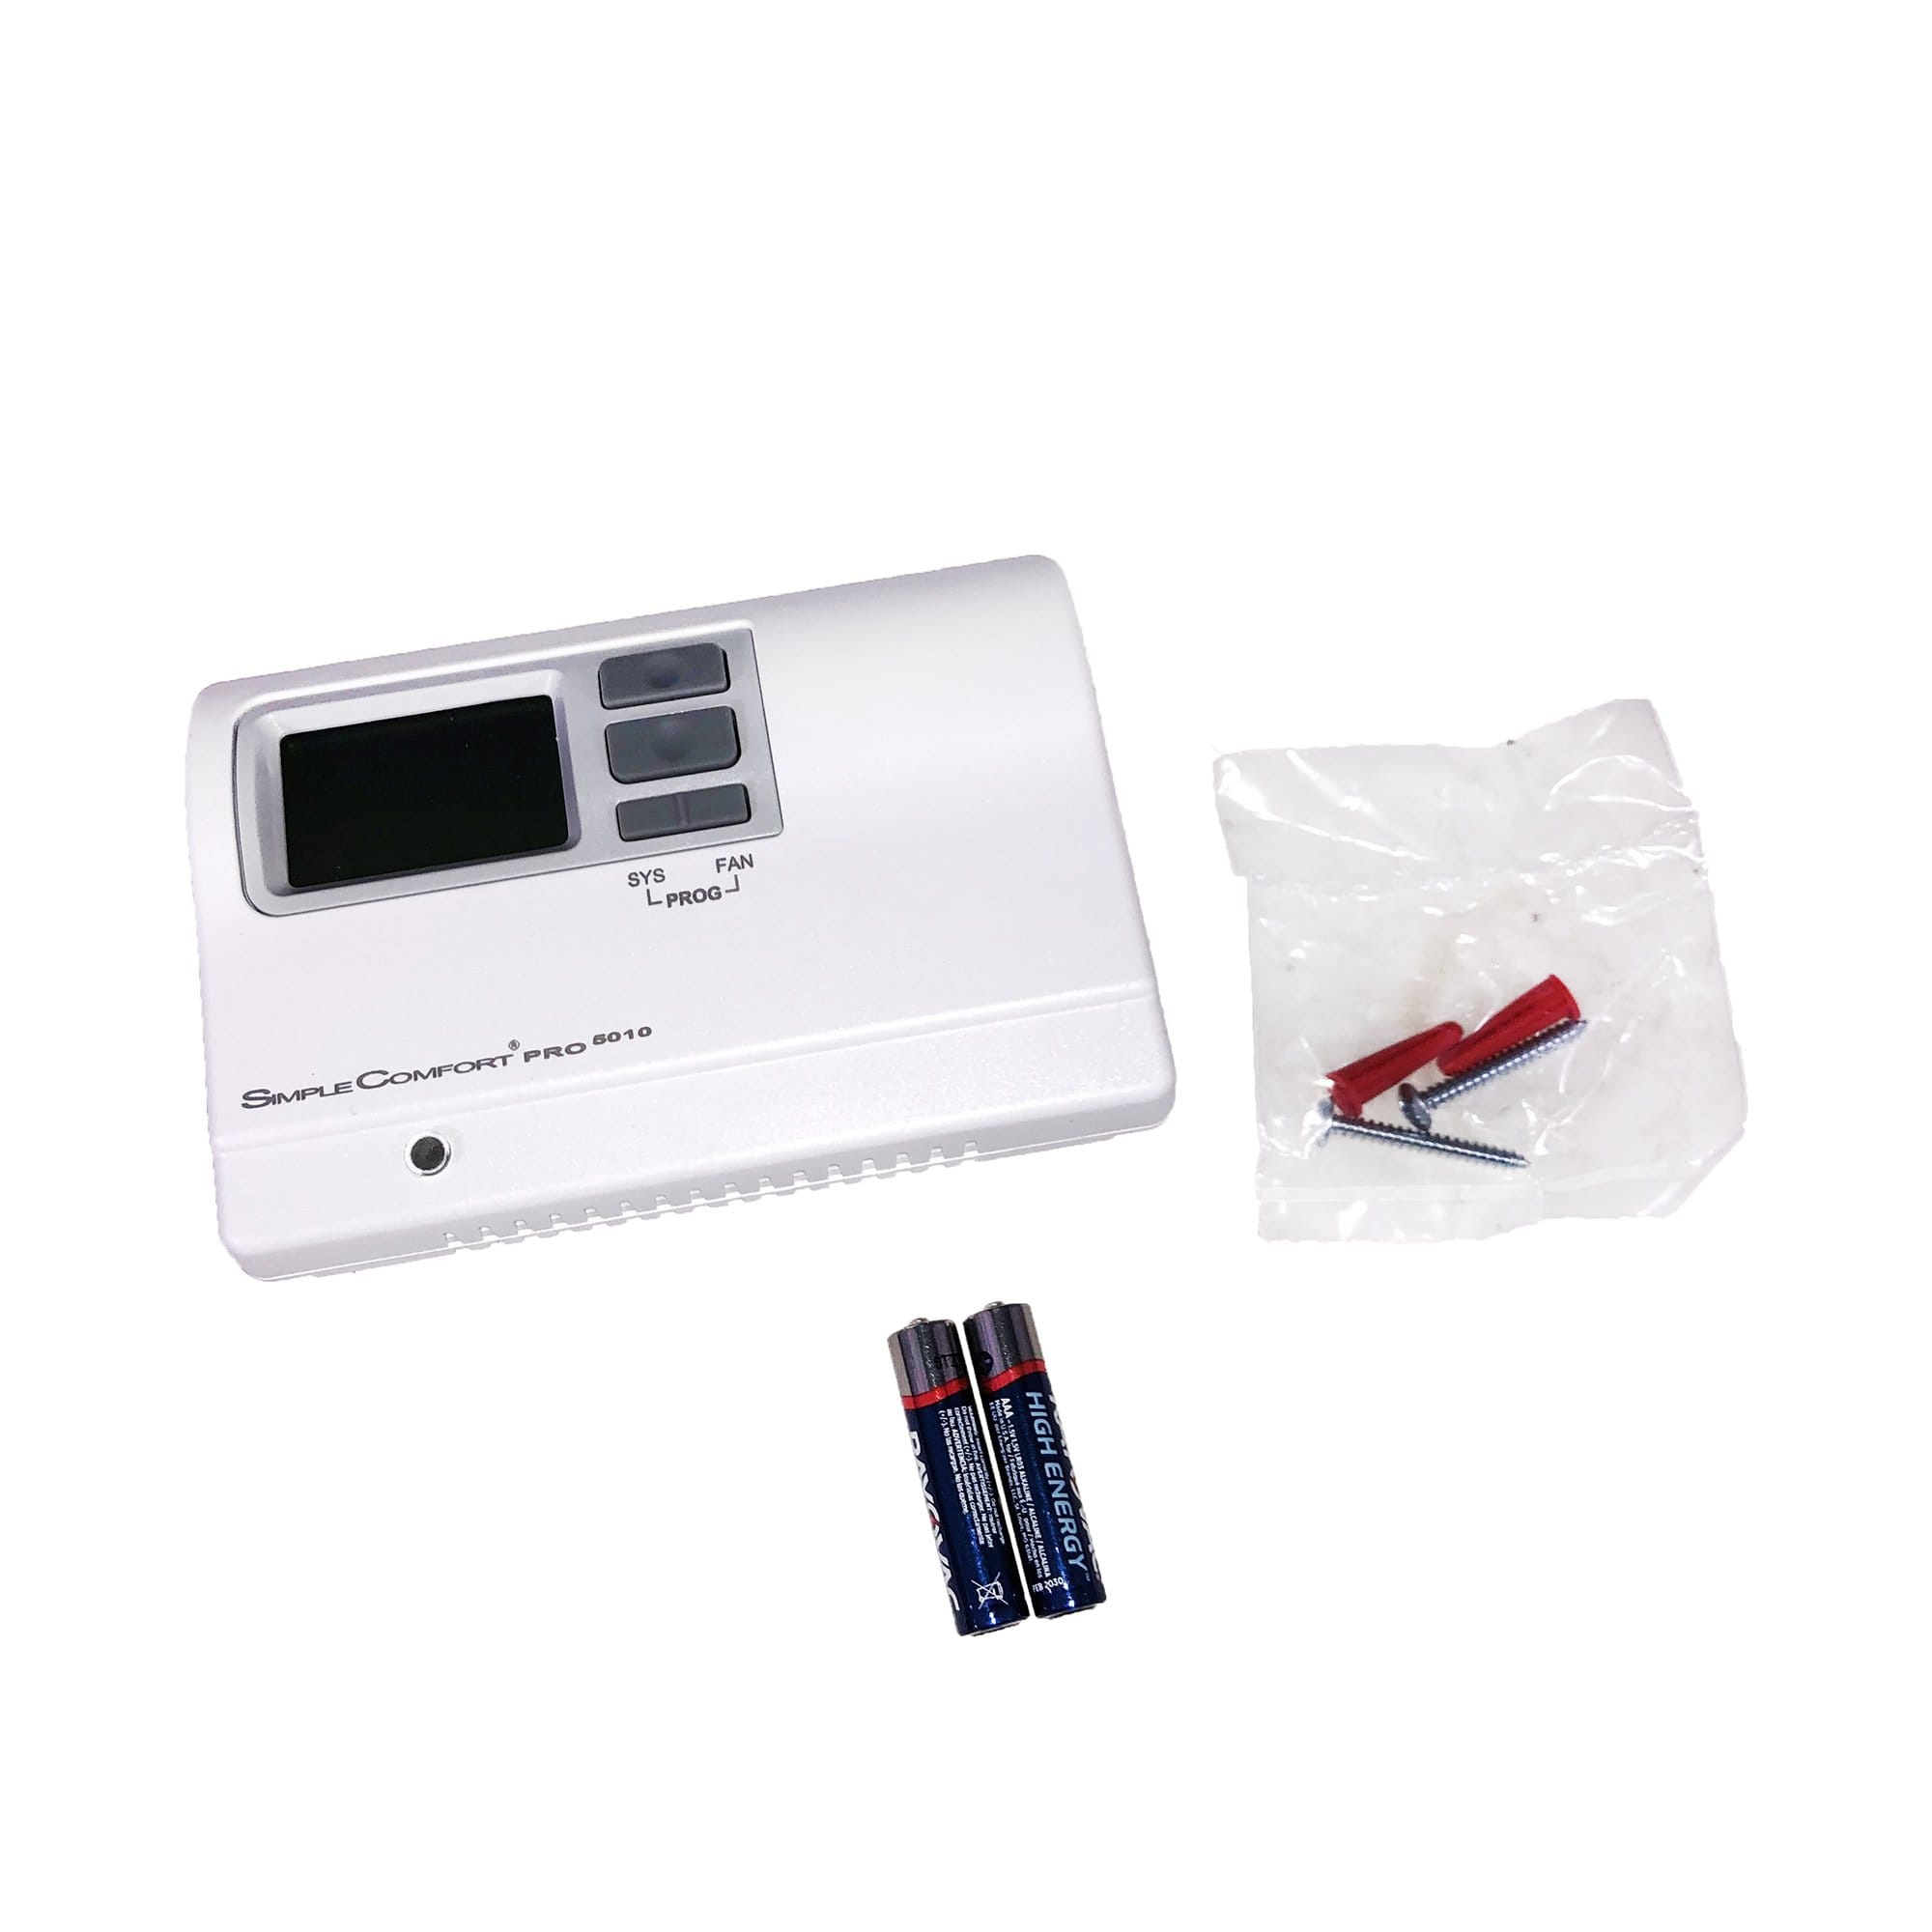 ICM Controls SC5010 Programmable Thermostat